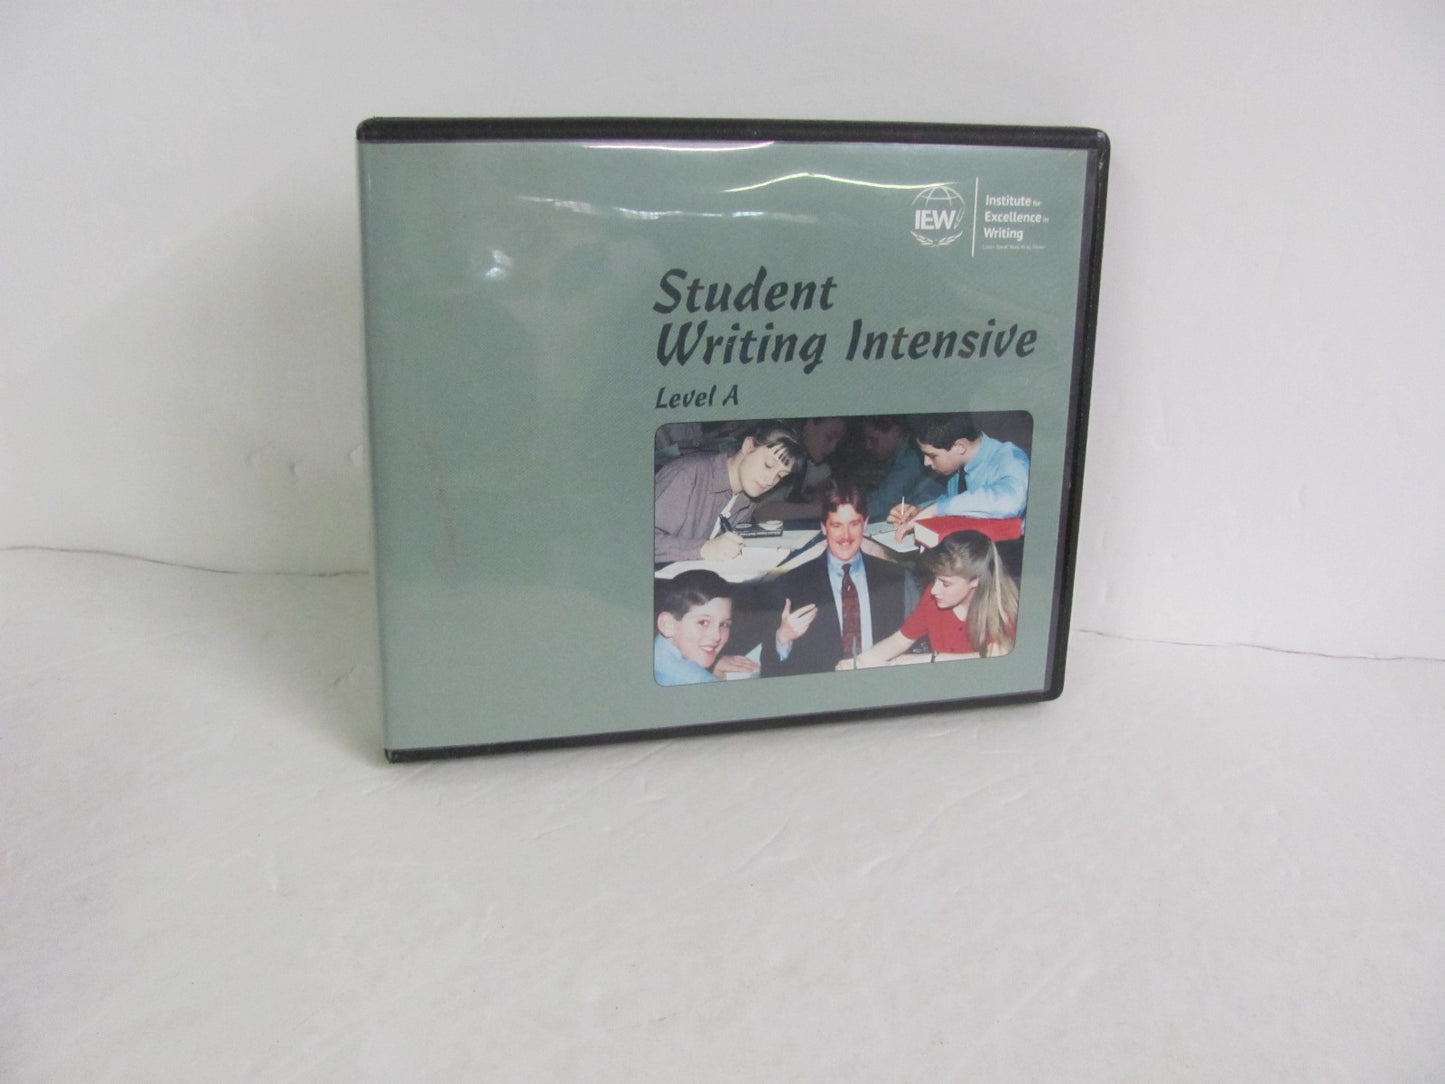 Student Writing Intensive A IEW DVD Pre-Owned Pudewa Creative Writing Books